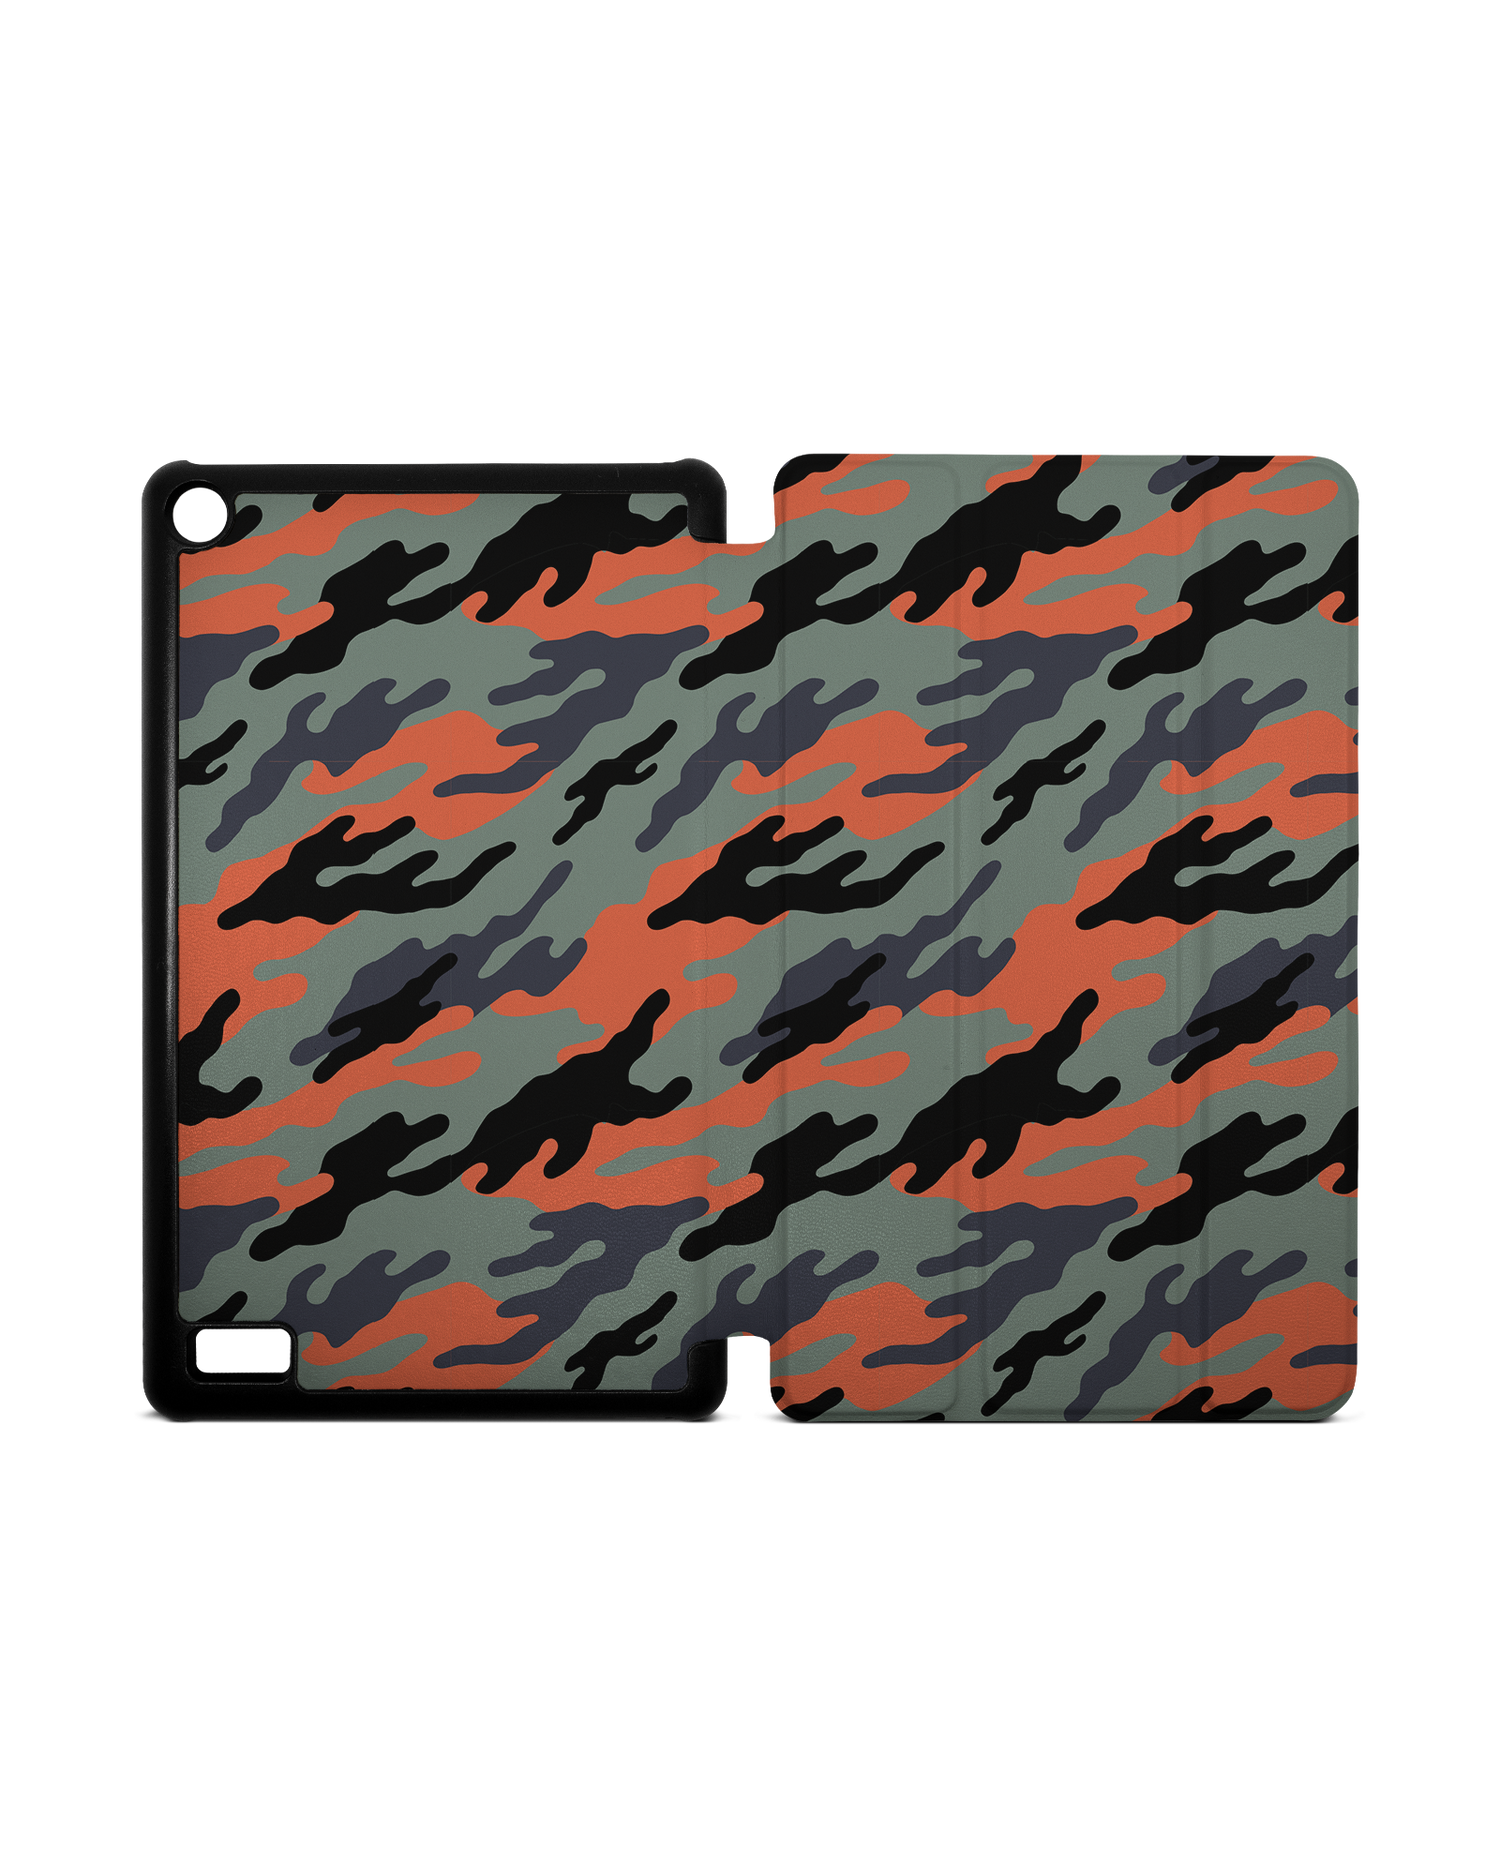 Camo Sunset Tablet Smart Case for Amazon Fire 7: Opened